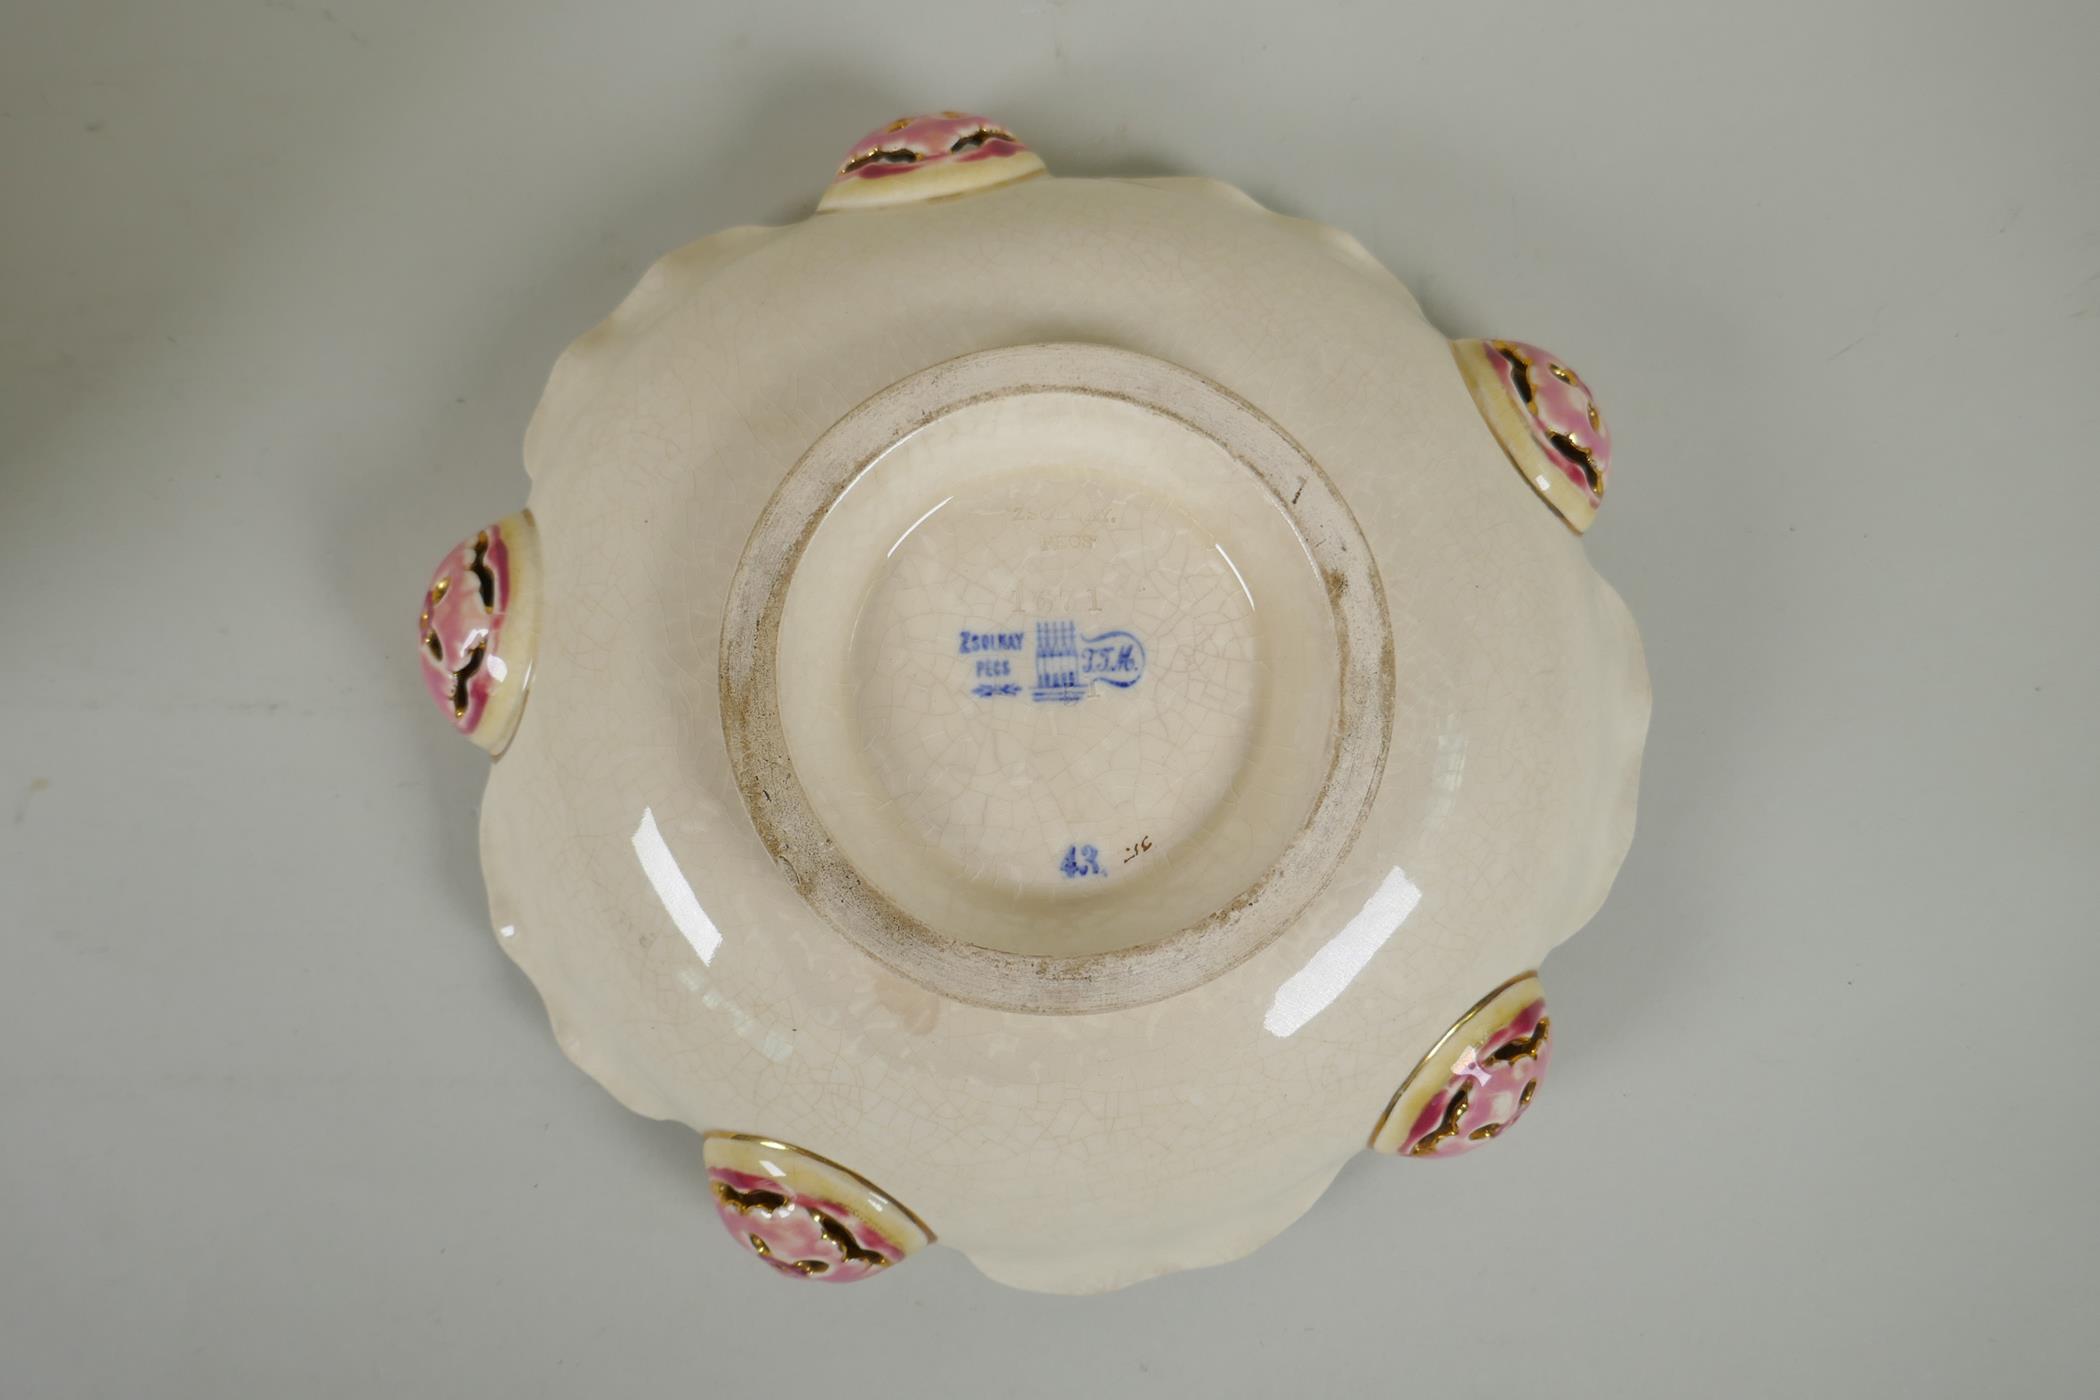 A Zsolnay Pecs polychrome porcelain dish with frilled rim and floral decoration, together with a - Image 4 of 7